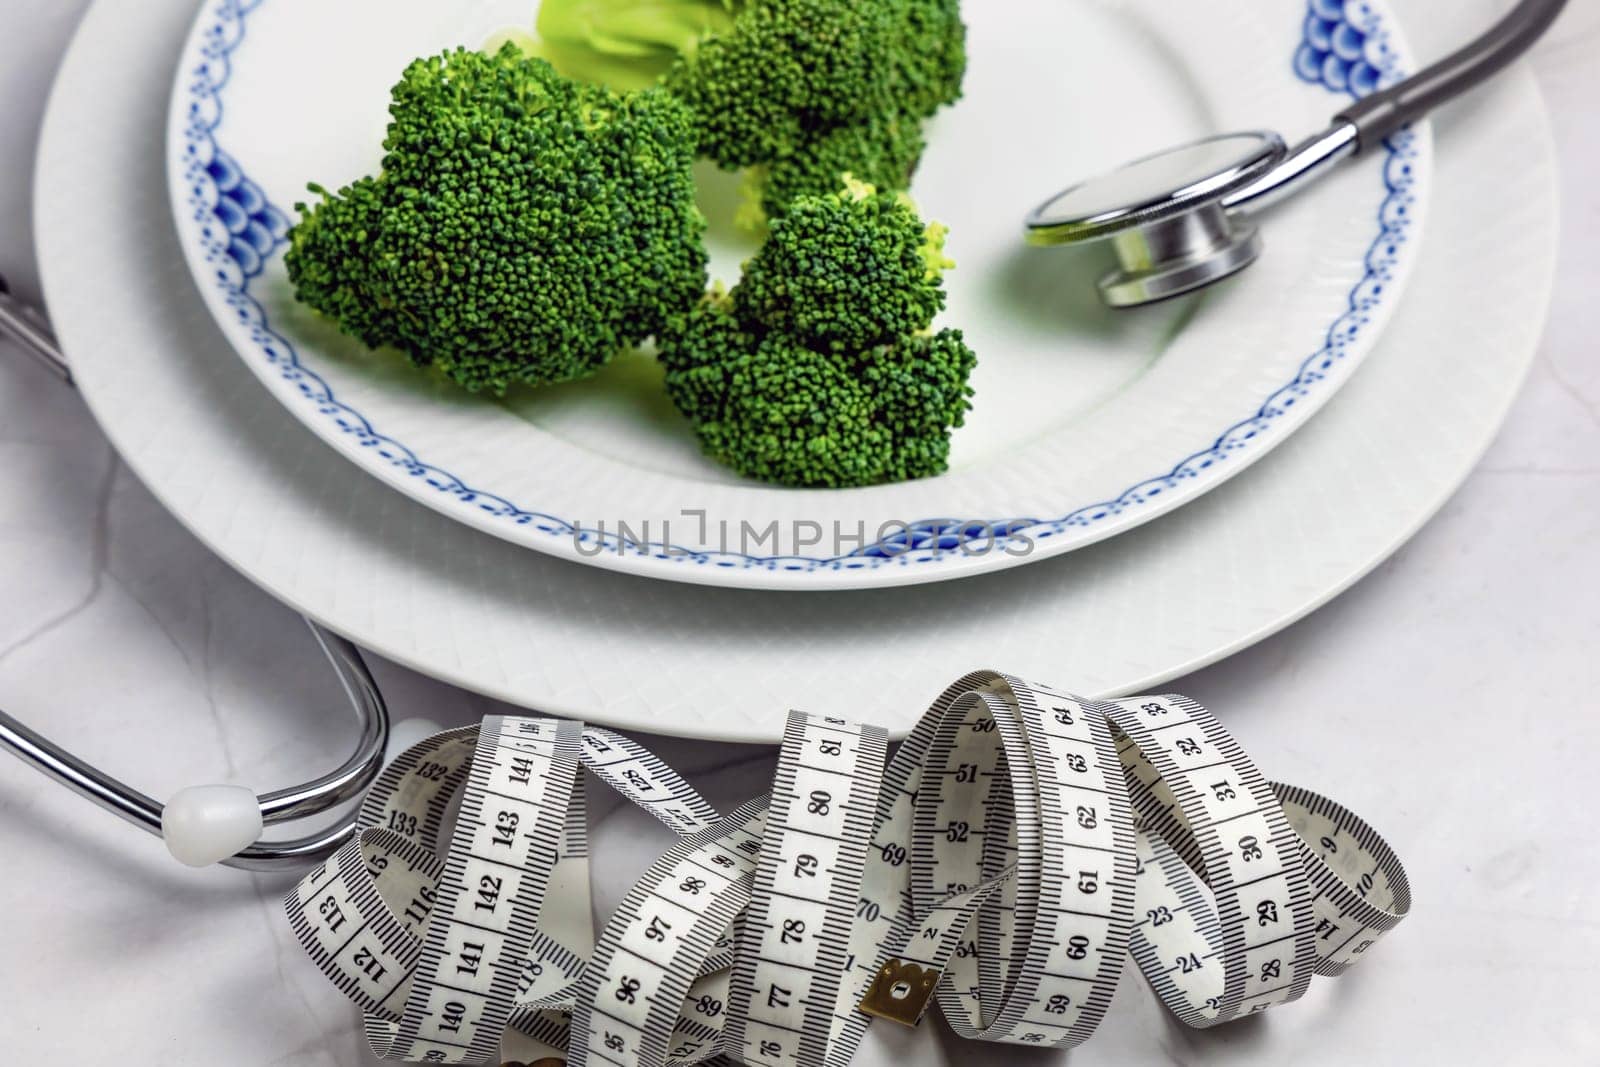 Concept of healthy eating and weight loss. Plate of green broccoli.